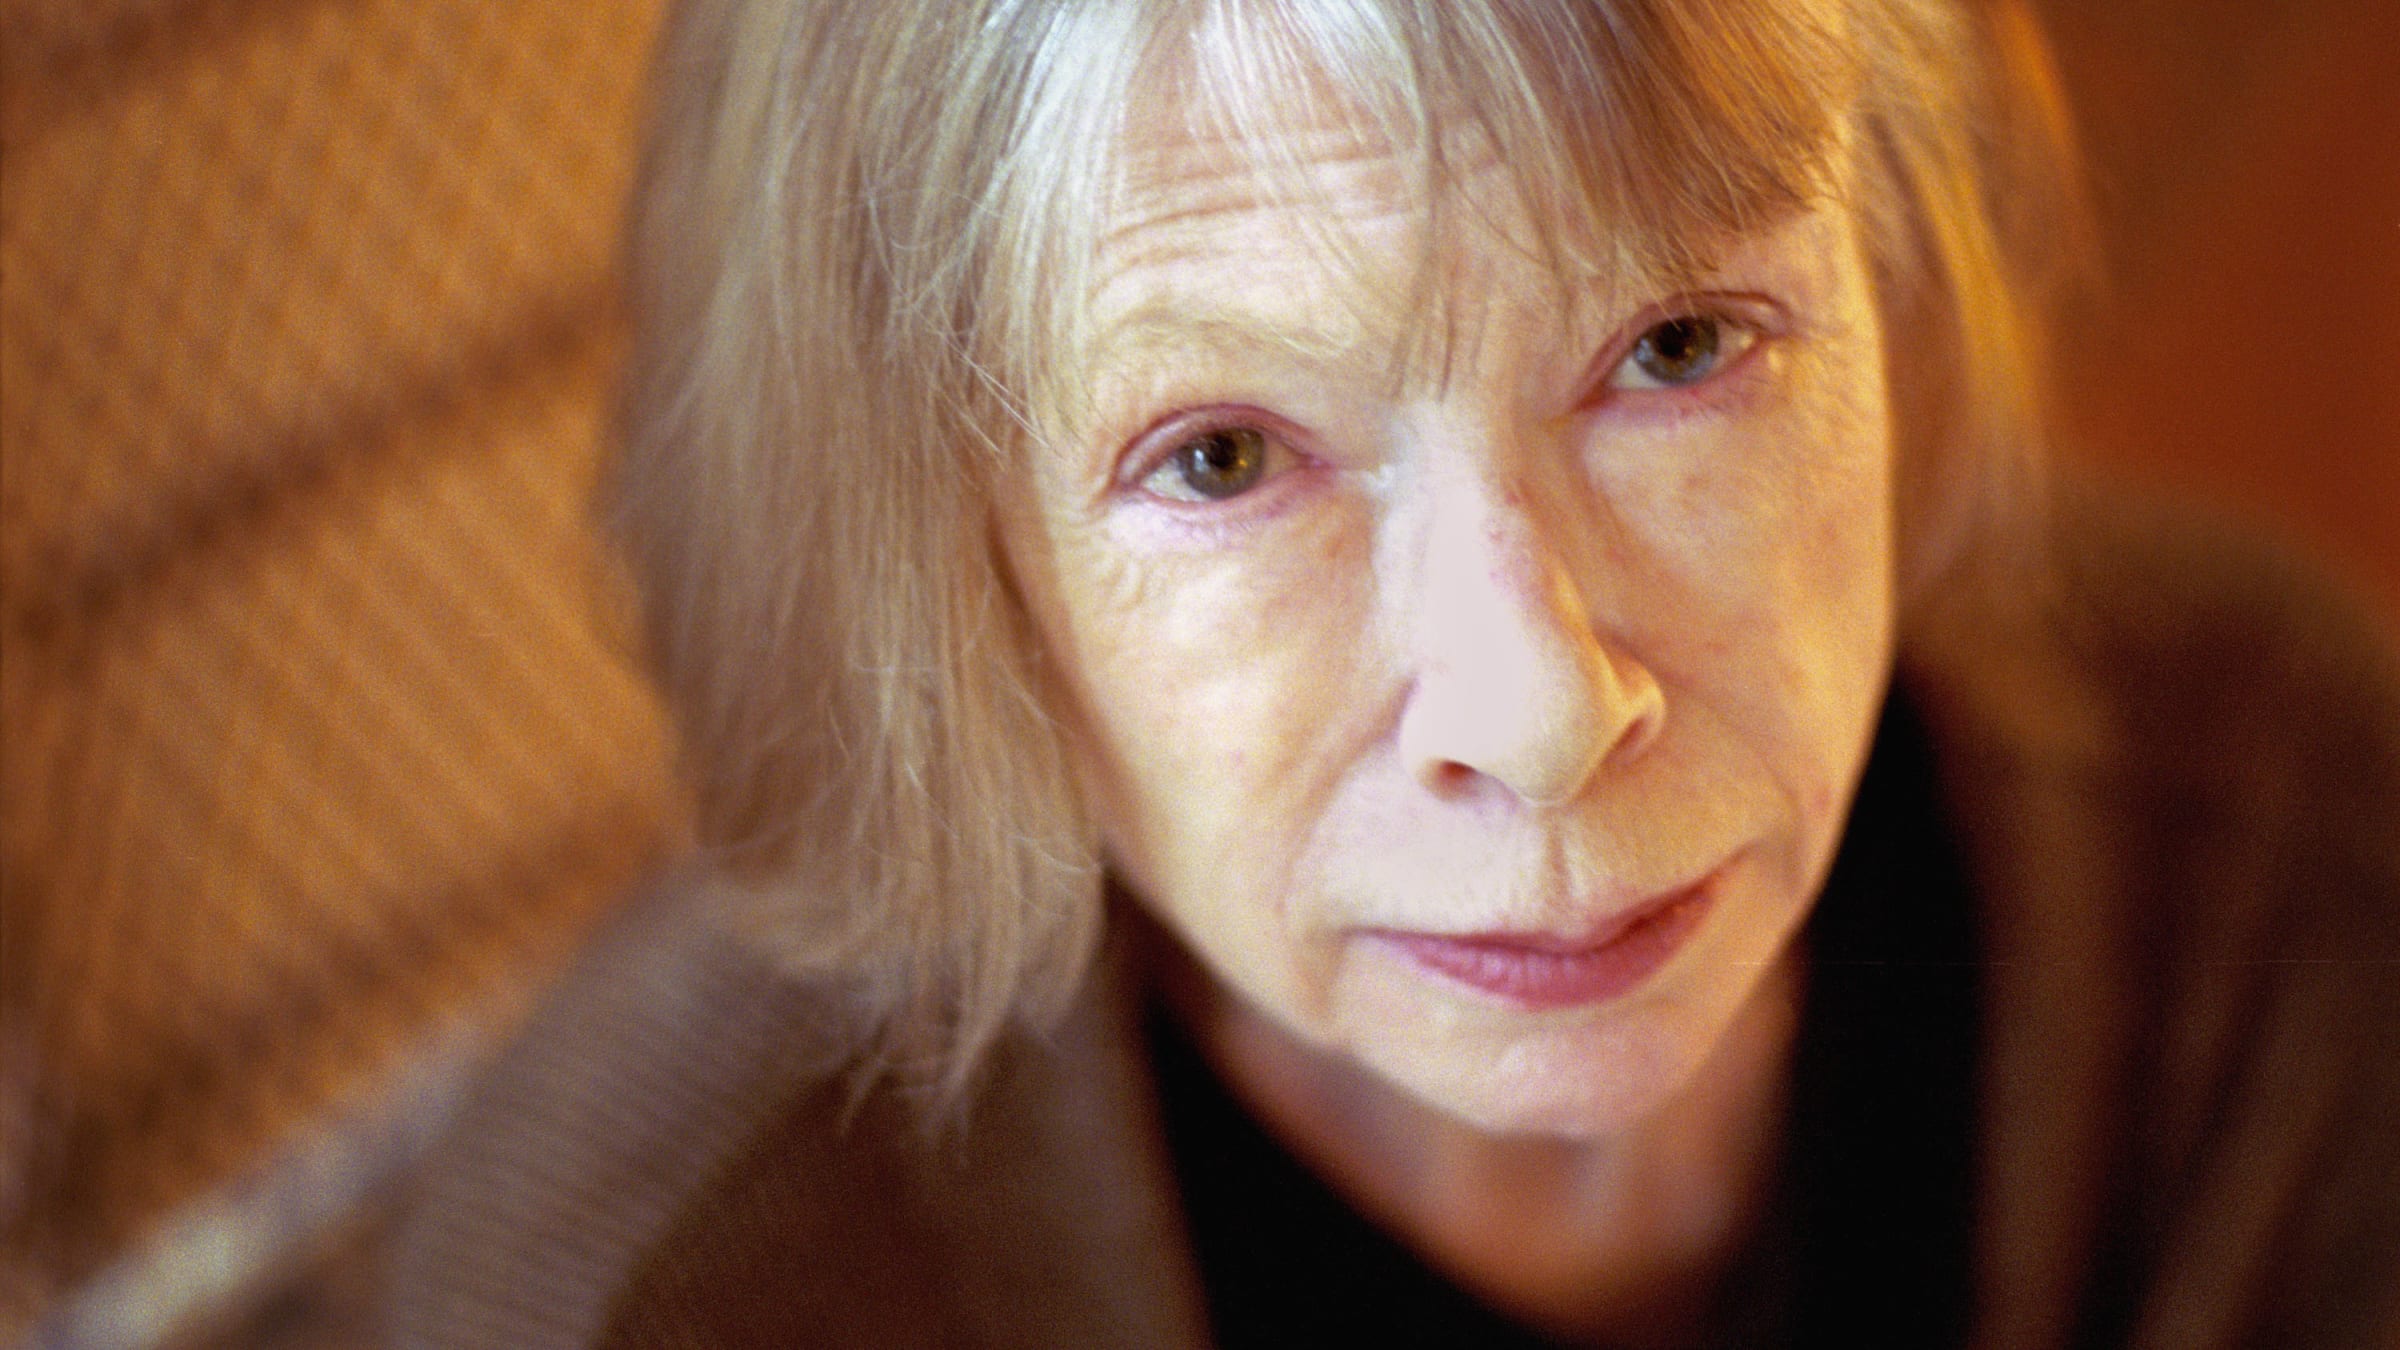 Joan Didion: 5 things we learned from her new Netflix documentary